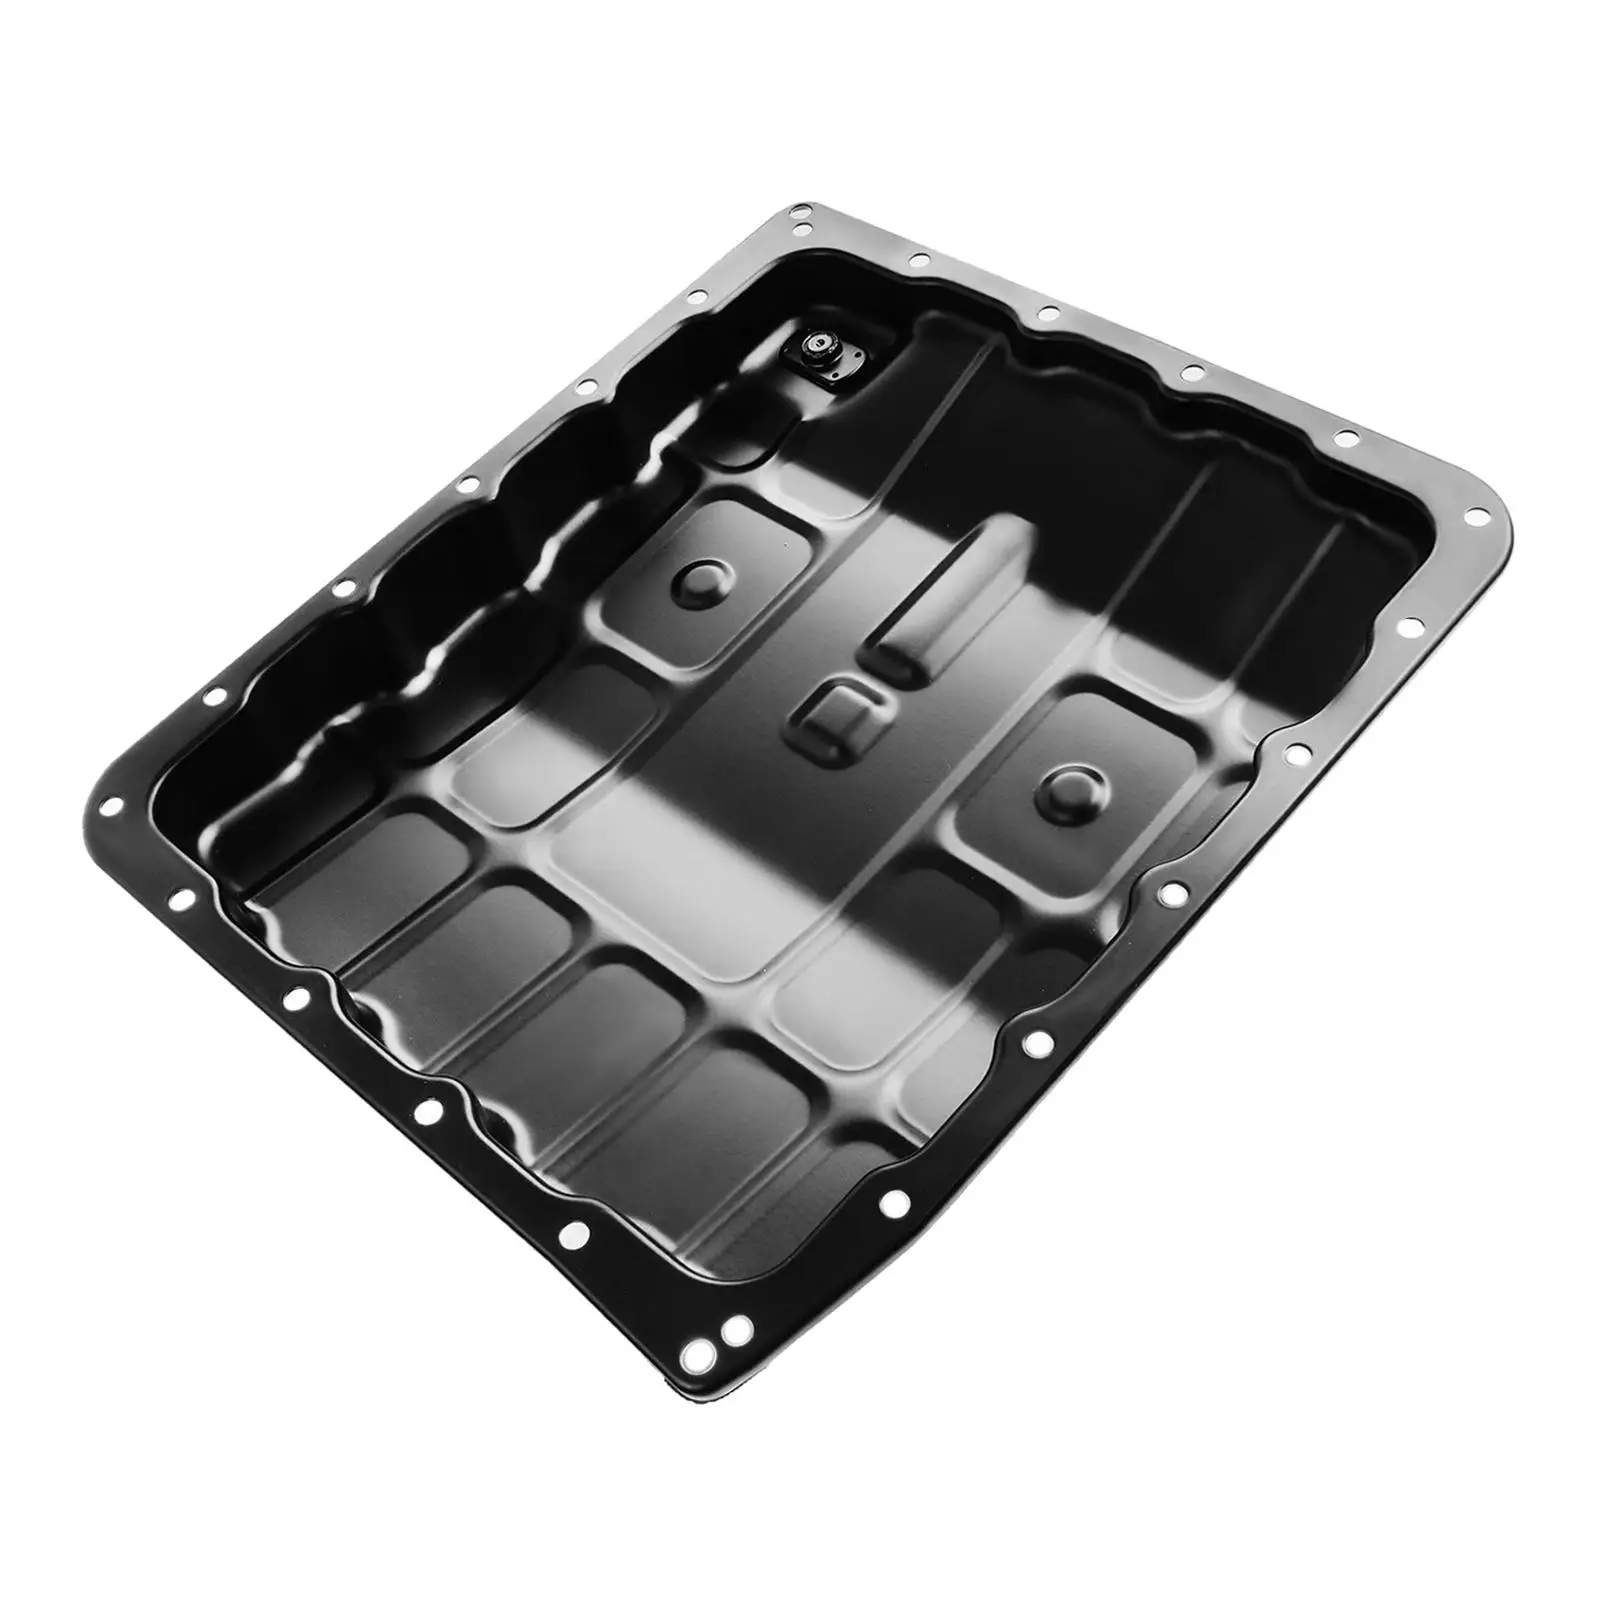 Transmission Oil Pan 3139090x0B Spare Parts Stable Performance Automotive Replaces Accessory for Nissan Titan 350Z Frontier